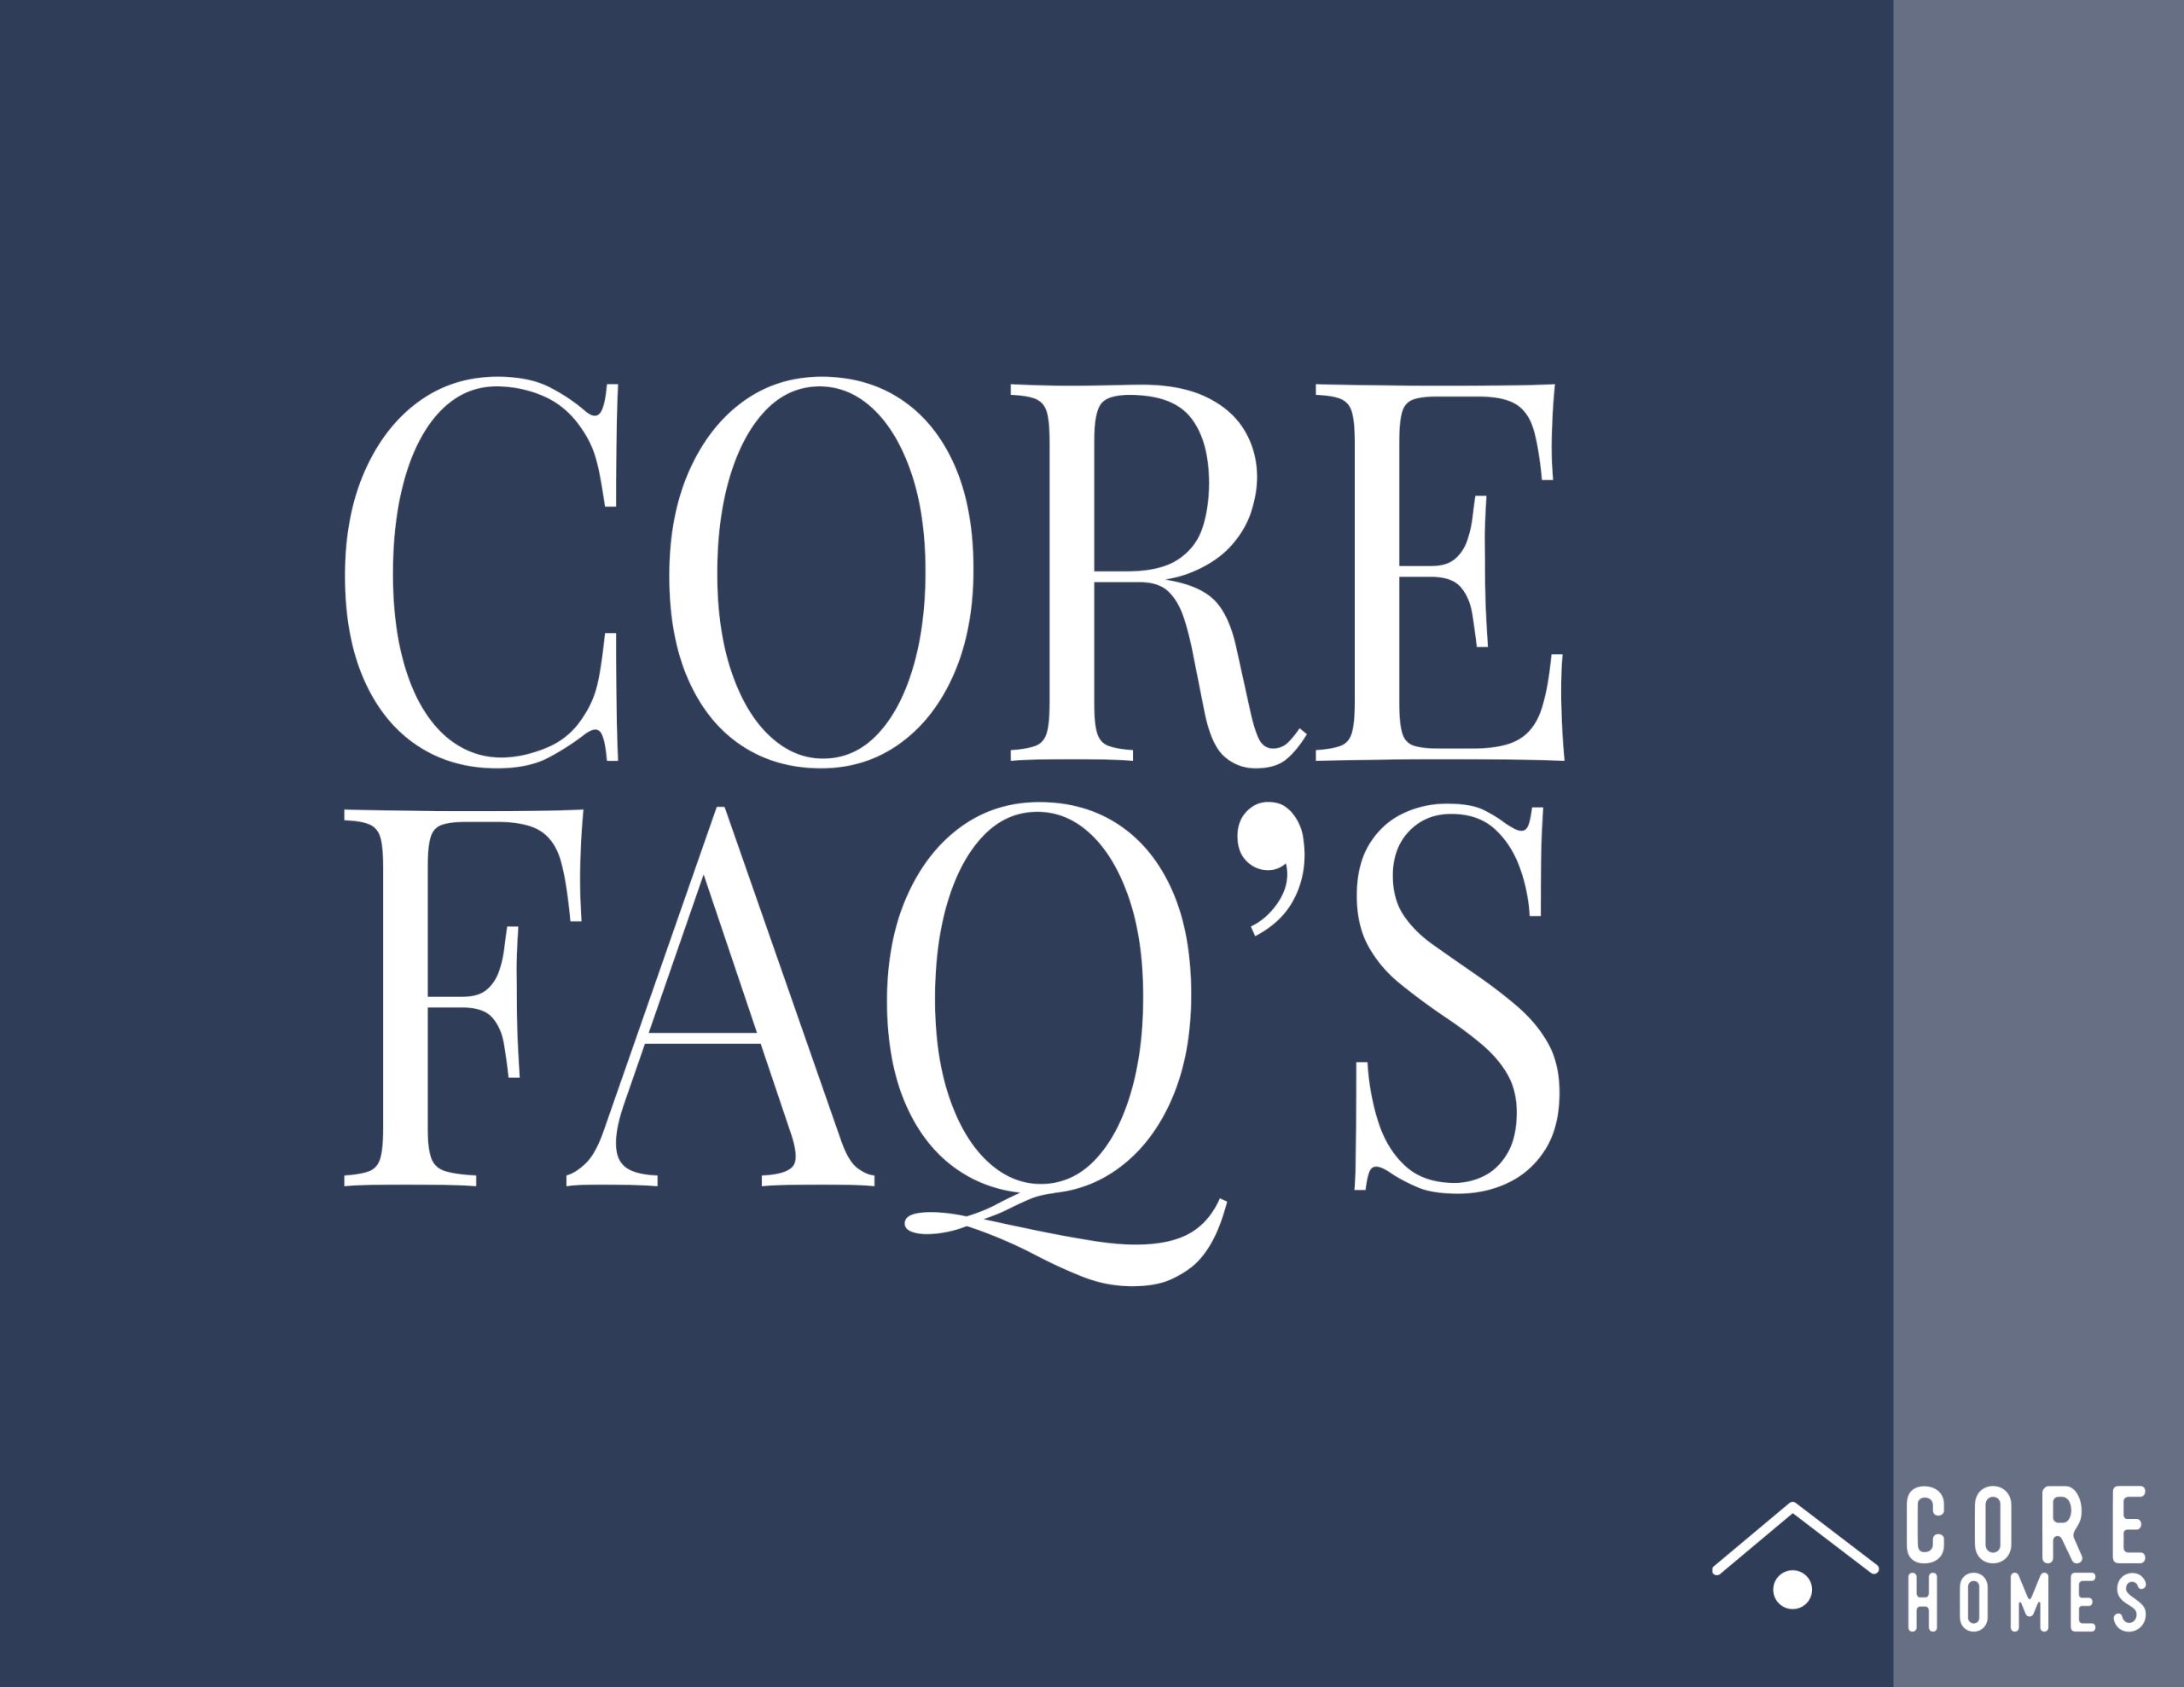 Core Homes FAQS intro image